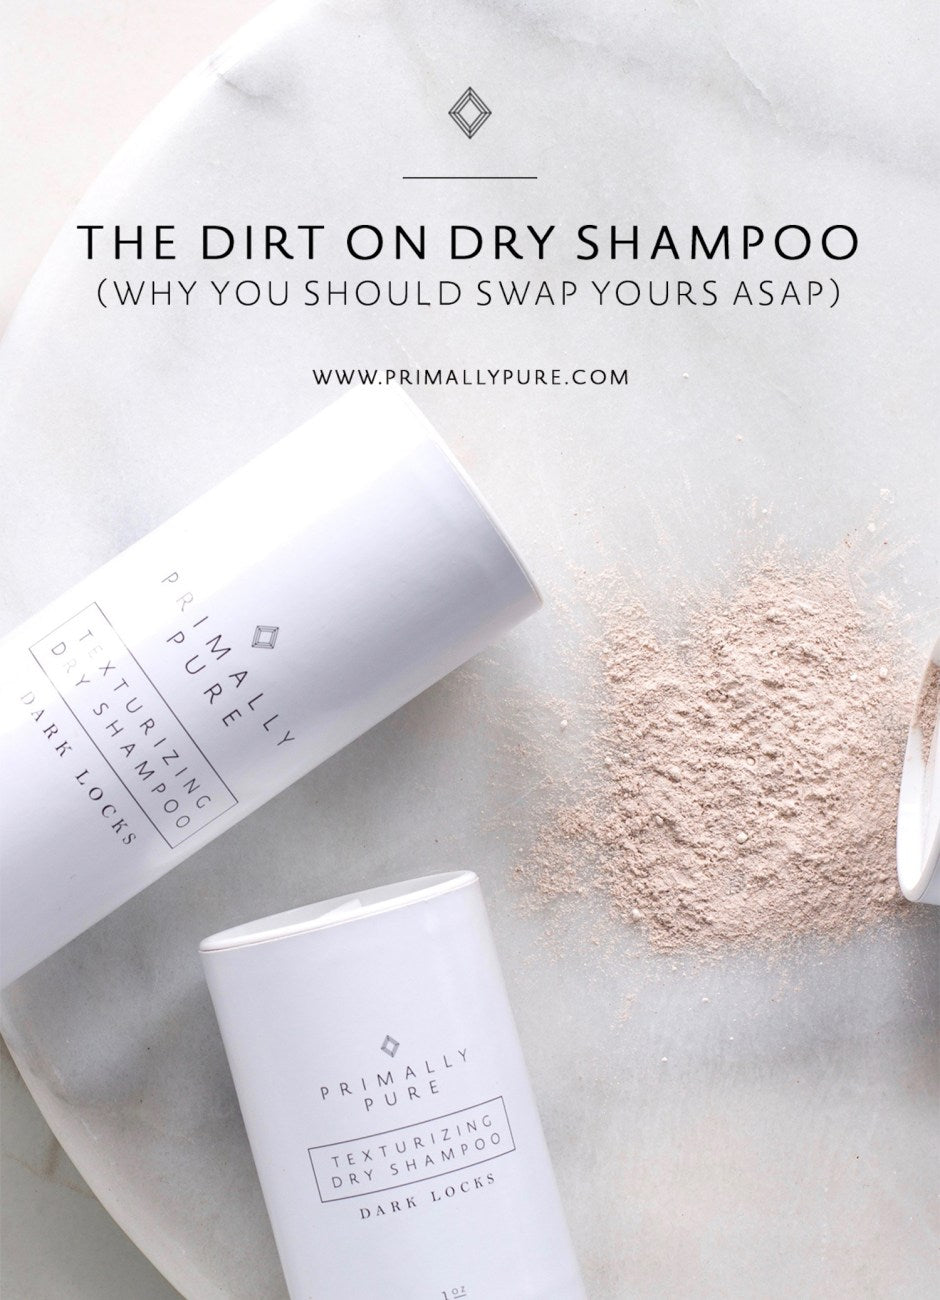 Dry shampoo has become a daily staple in most women's beauty routines. It extends the life of a style in between washes, helps absorb excess oil and refreshes second day hair. But there are some serious dangers associated with conventional + aerosol dry shampoos. Check out this post to uncover the dirt on dry shampoo! | Primally Pure Skincare